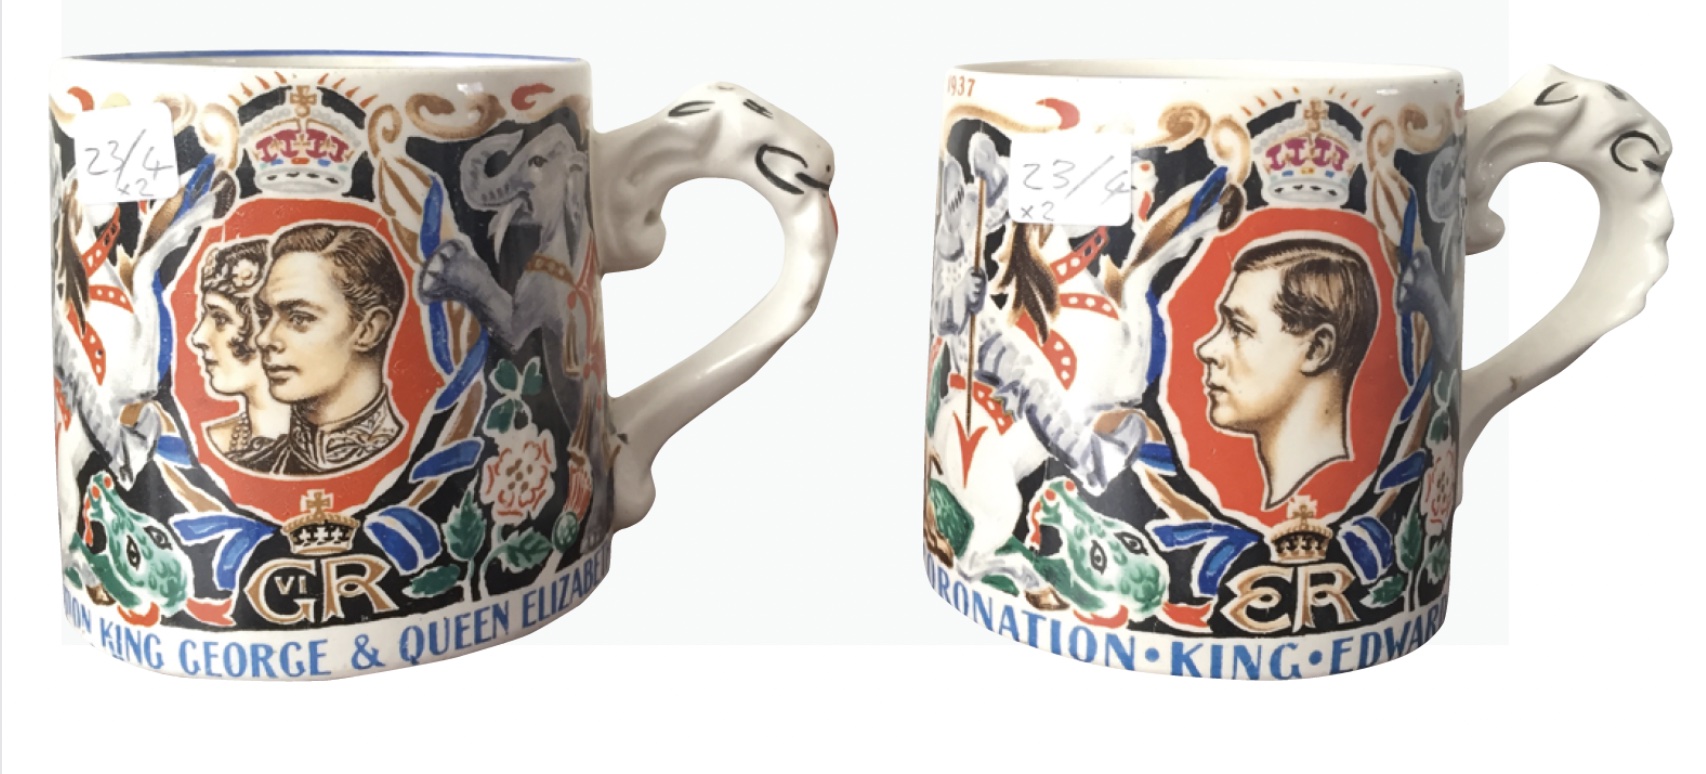 Cups designed by Dame Laura Knight for the coronations of Edward VIII and George VI